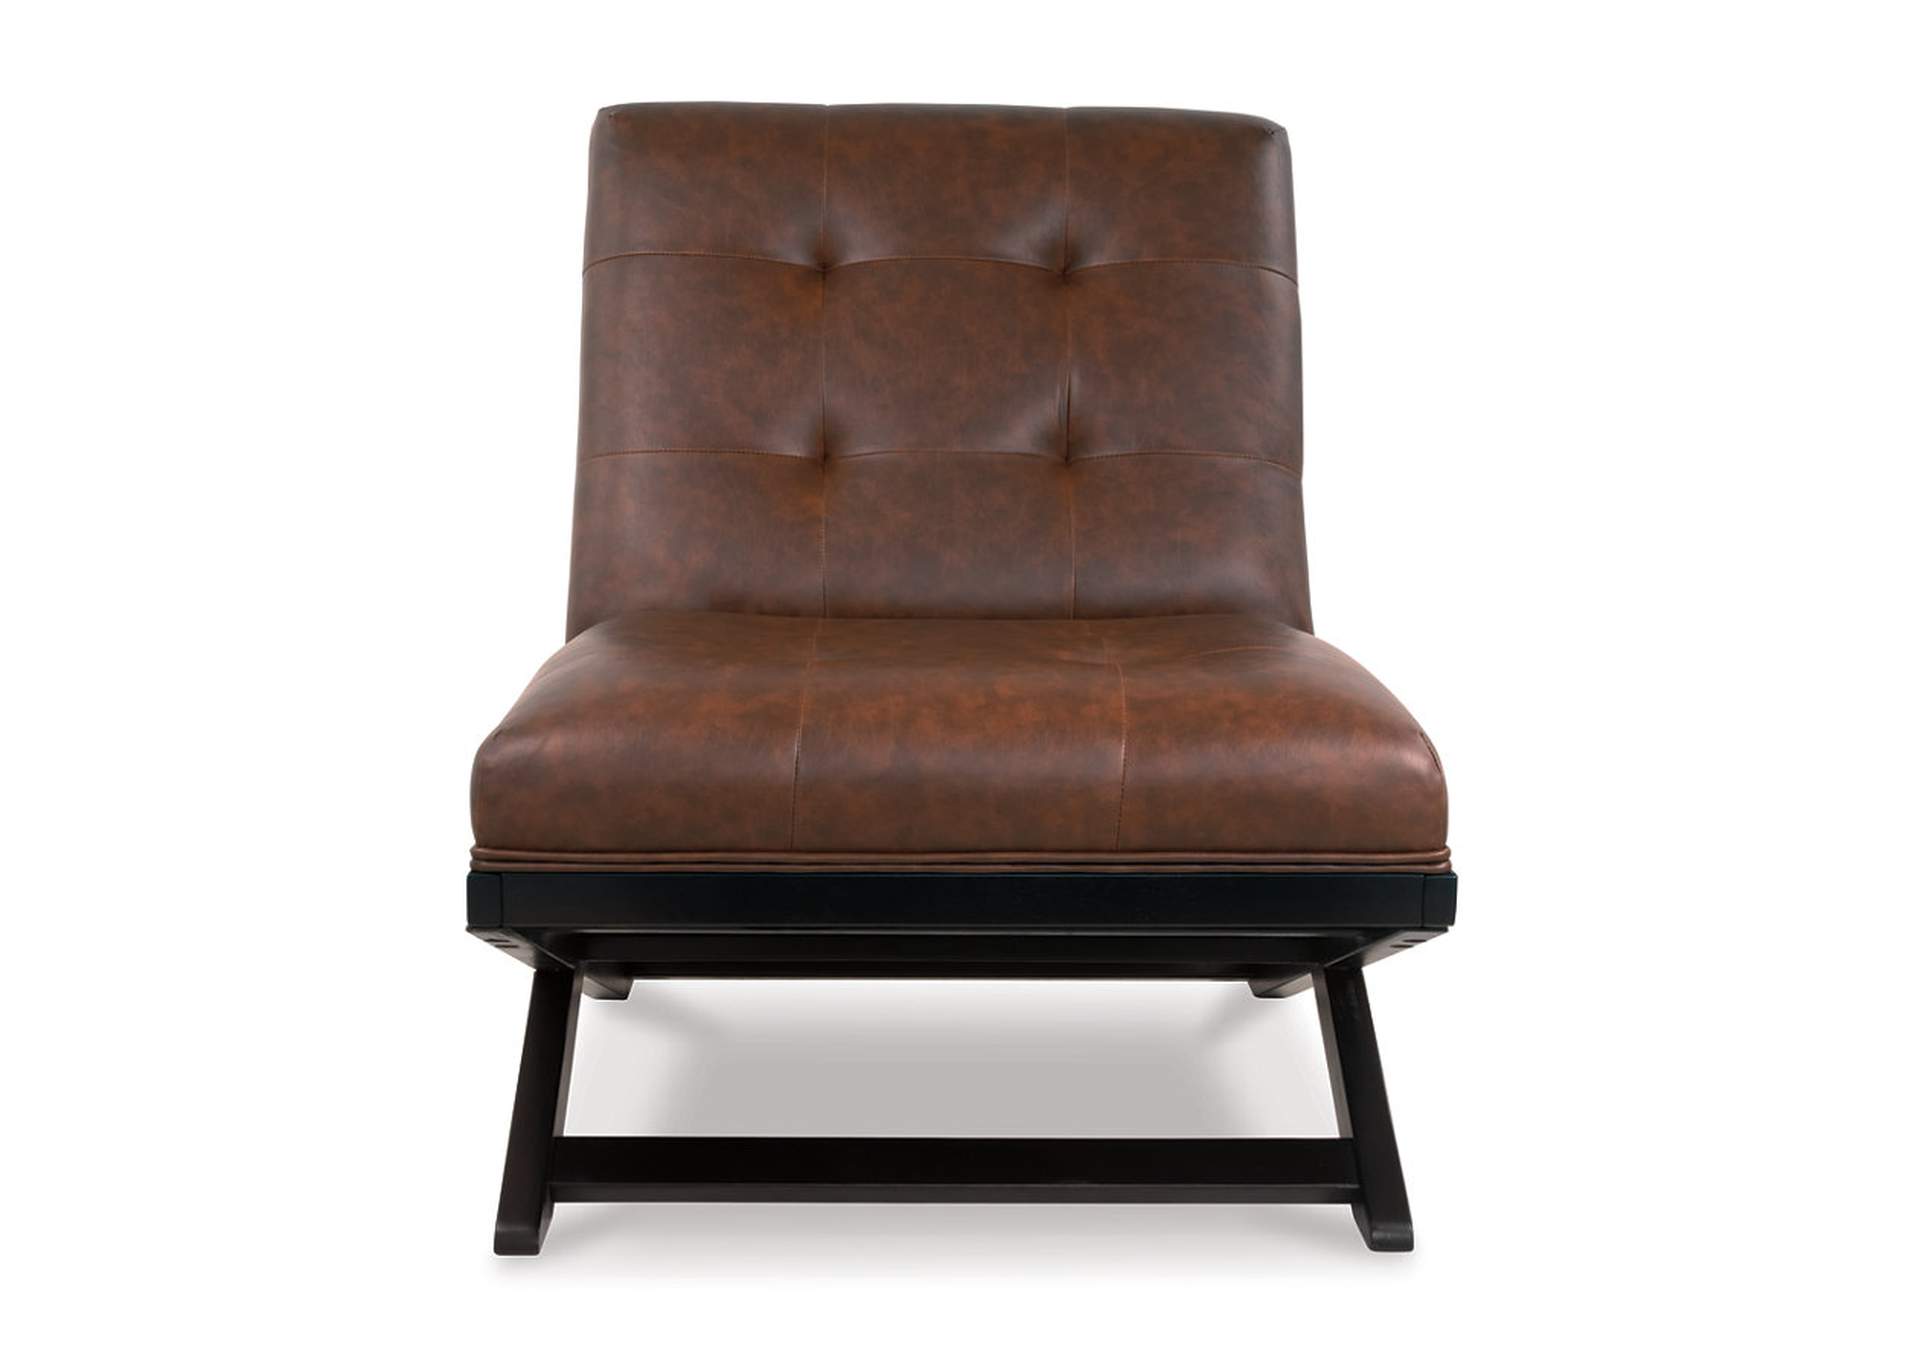 Sidewinder Accent Chair,Direct To Consumer Express